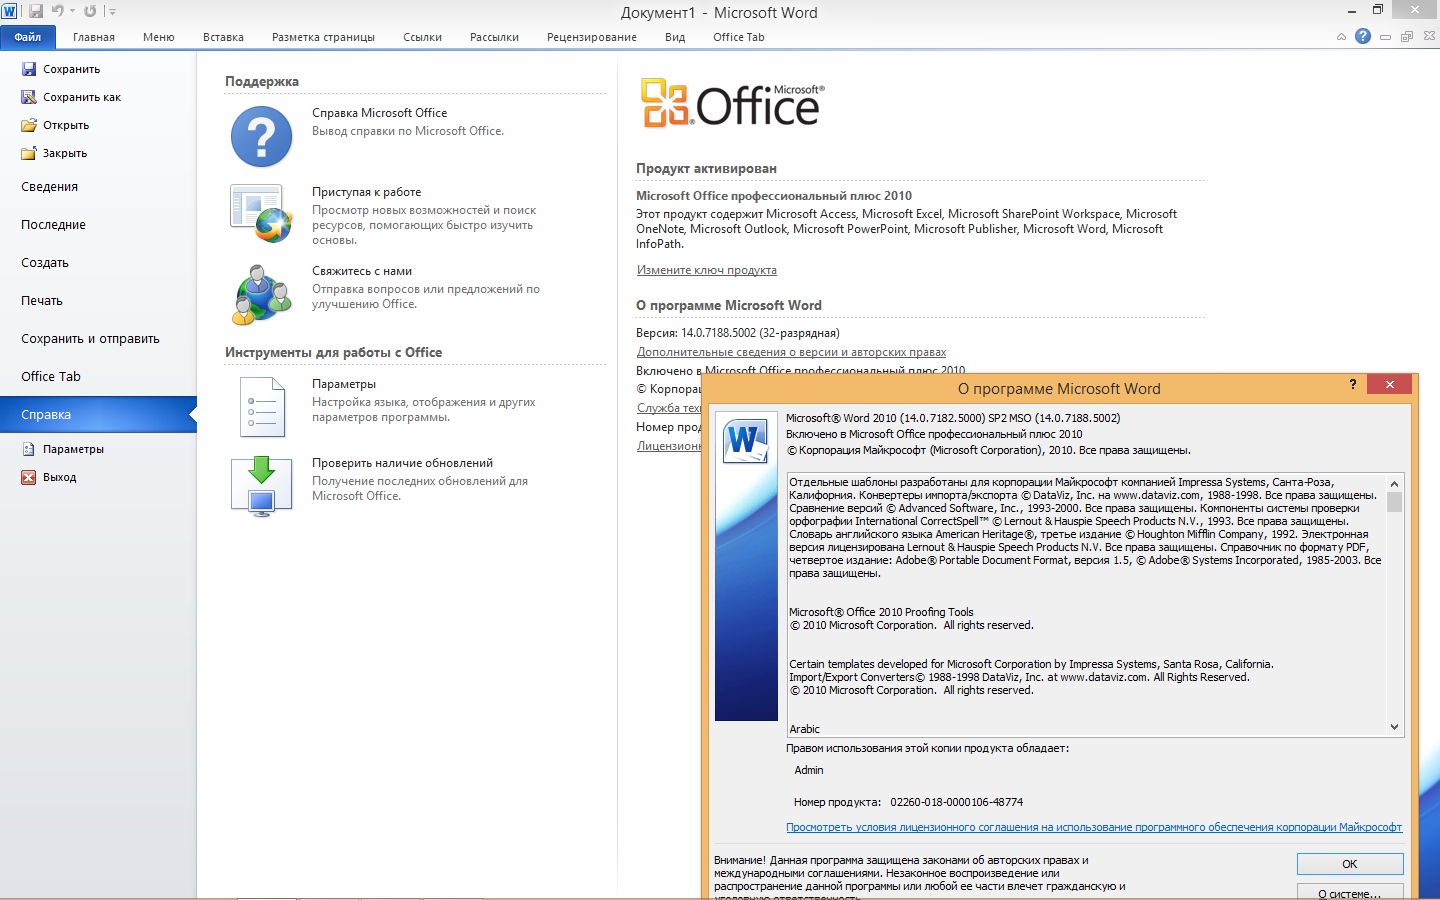 microsoft office 2010 access x64 thethingy torrent